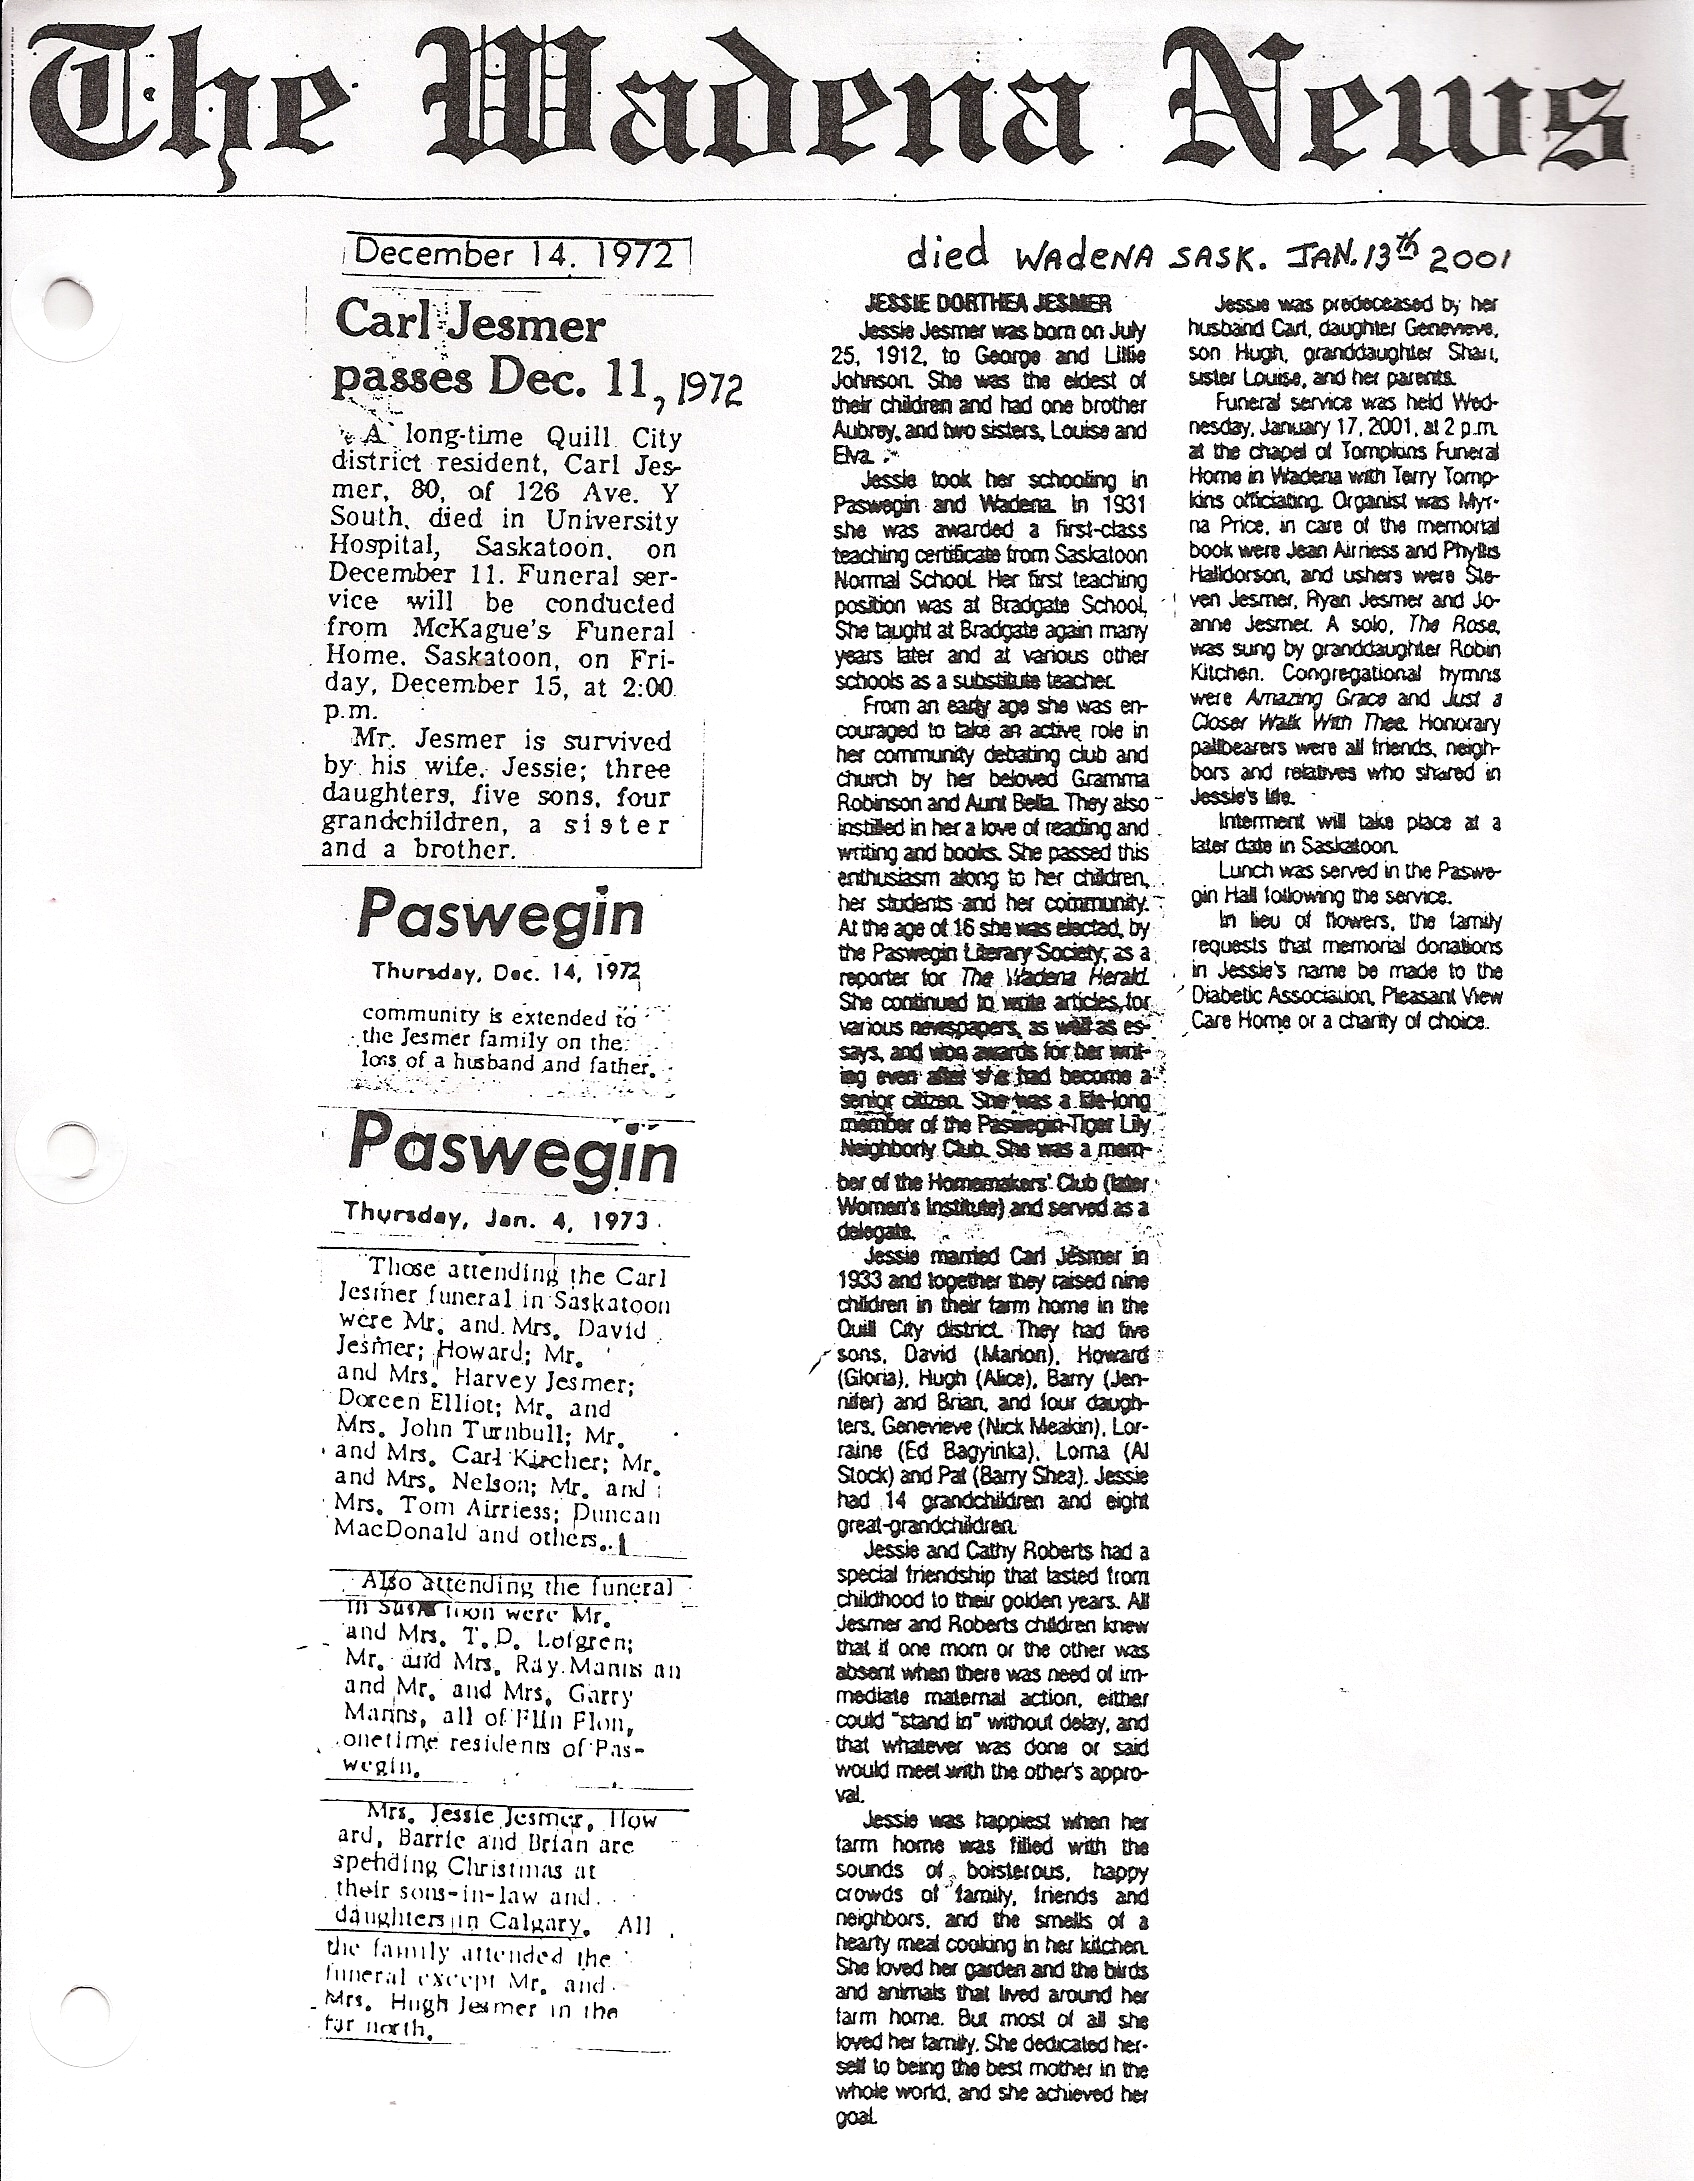 2-obituary pages